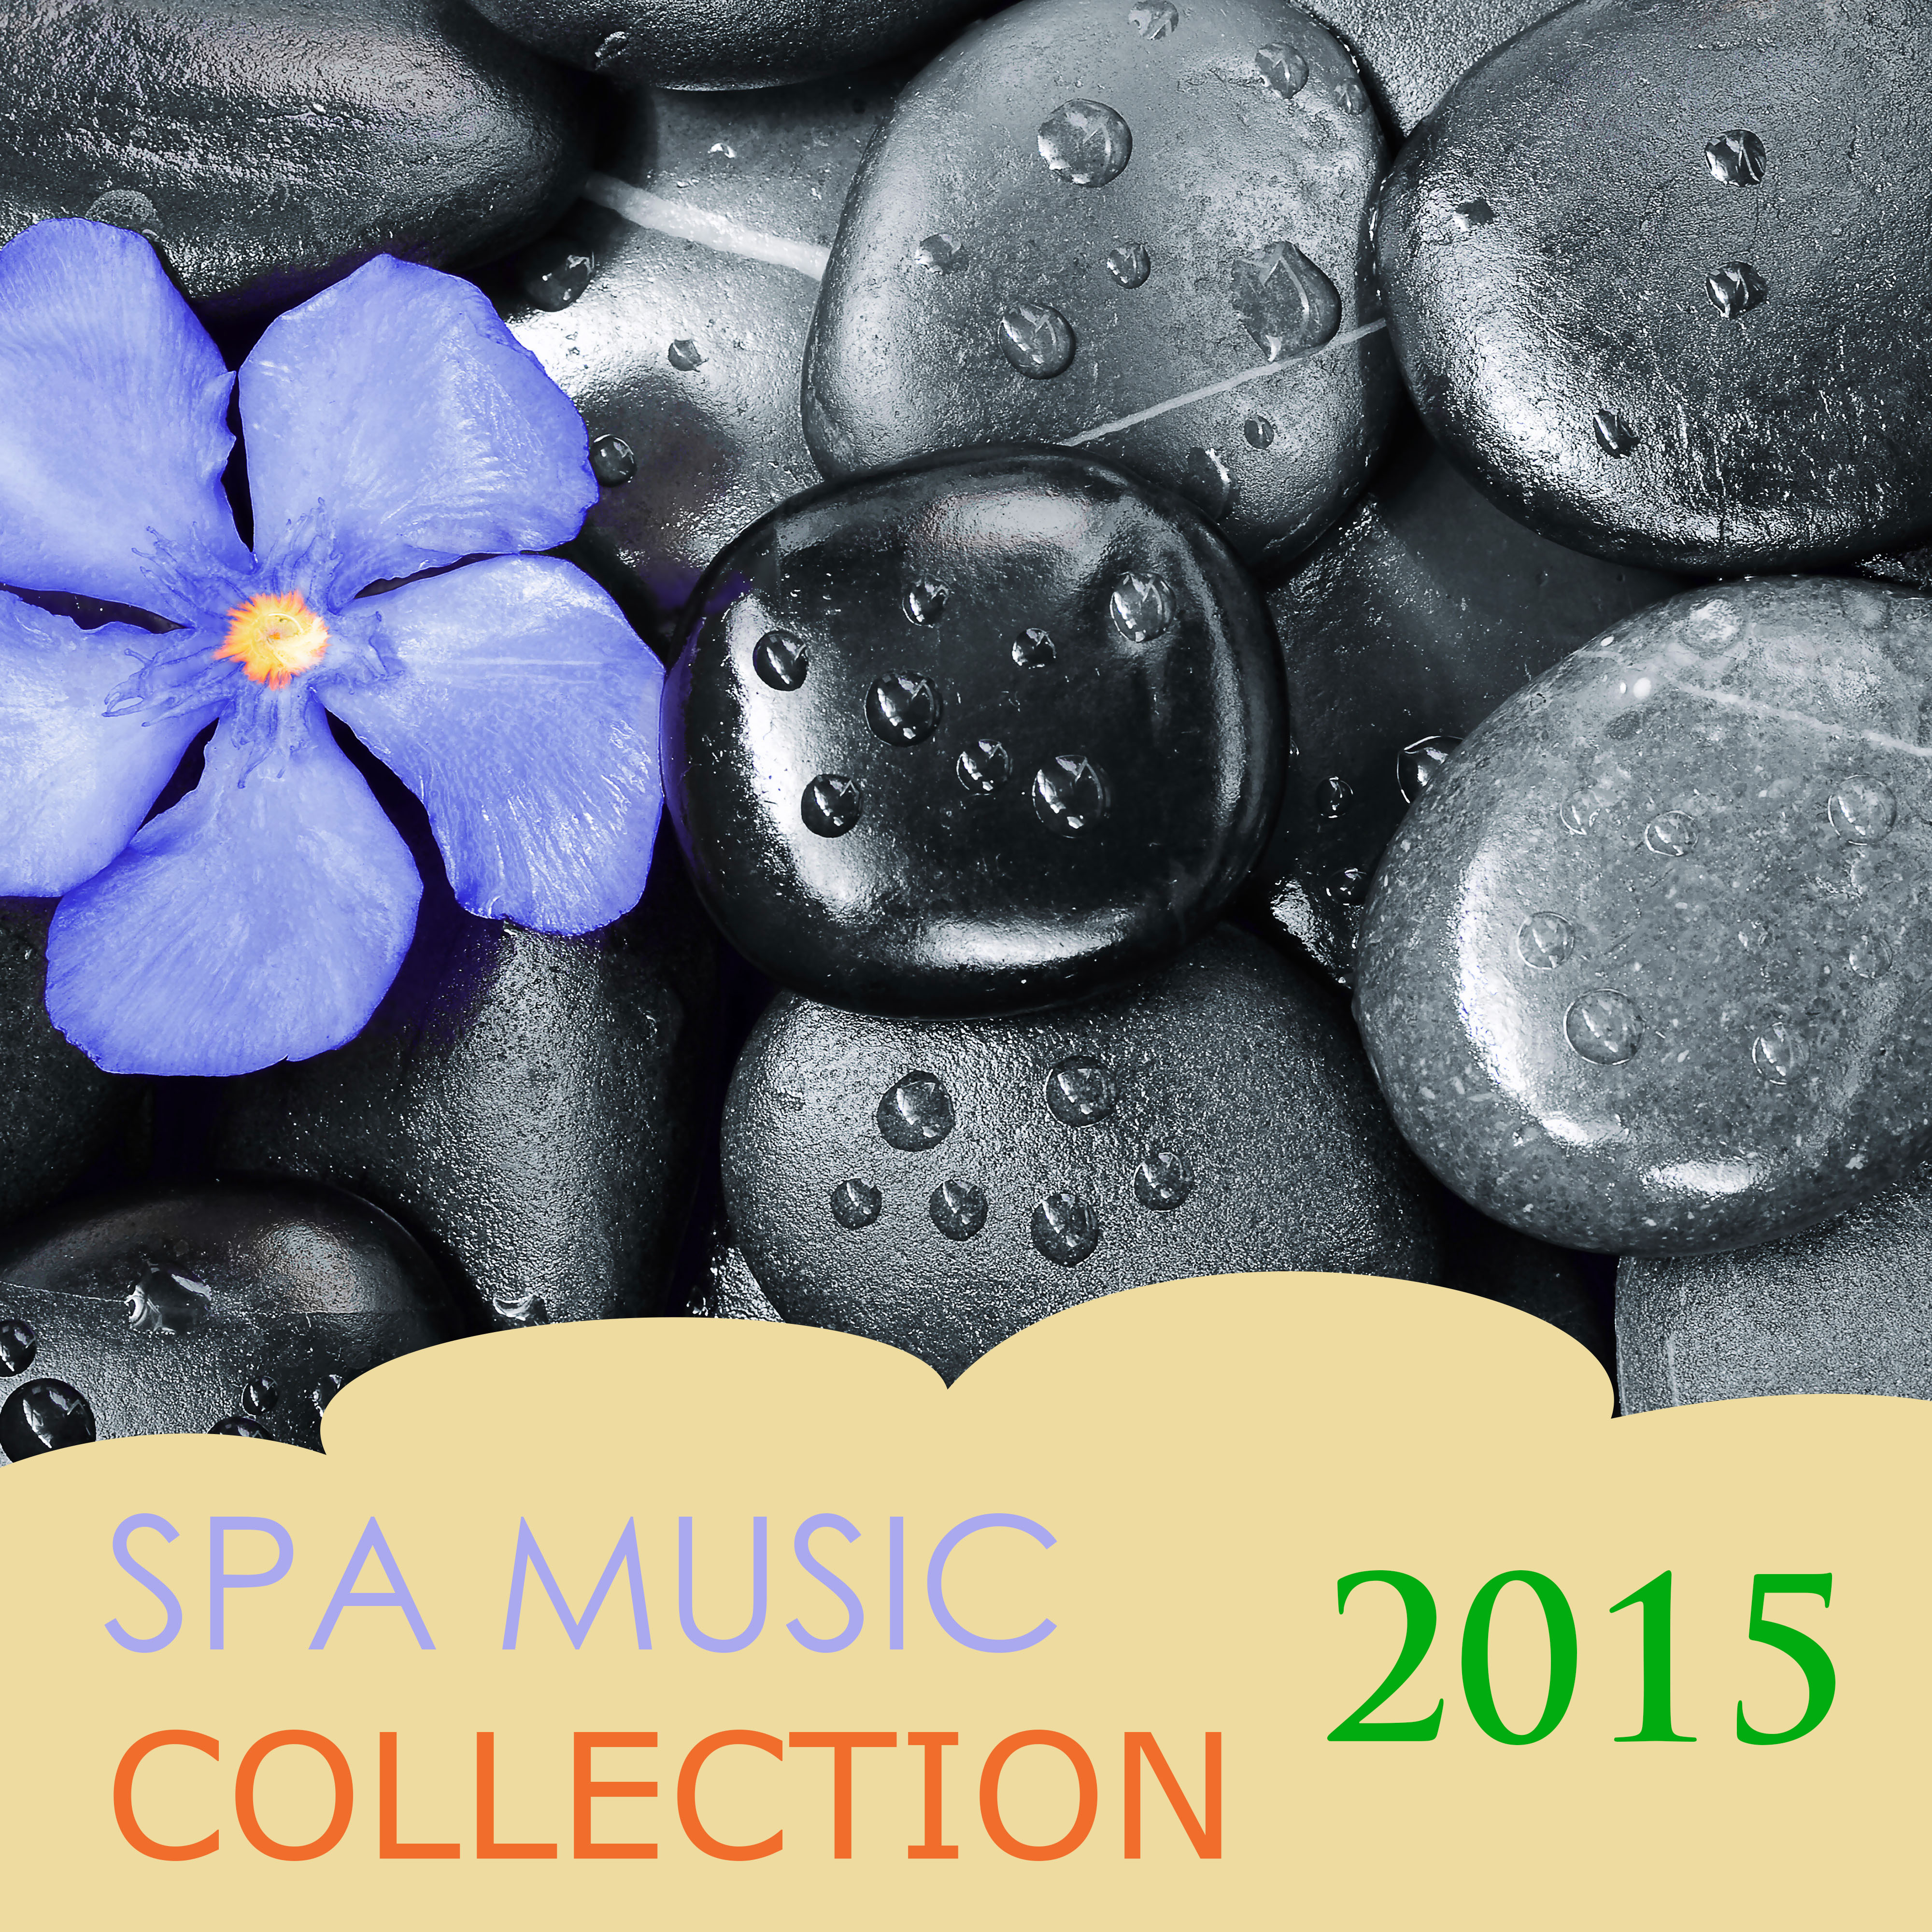 Birds Chirping in the Silent and Peaceful Forest - Top Spa Music 2015